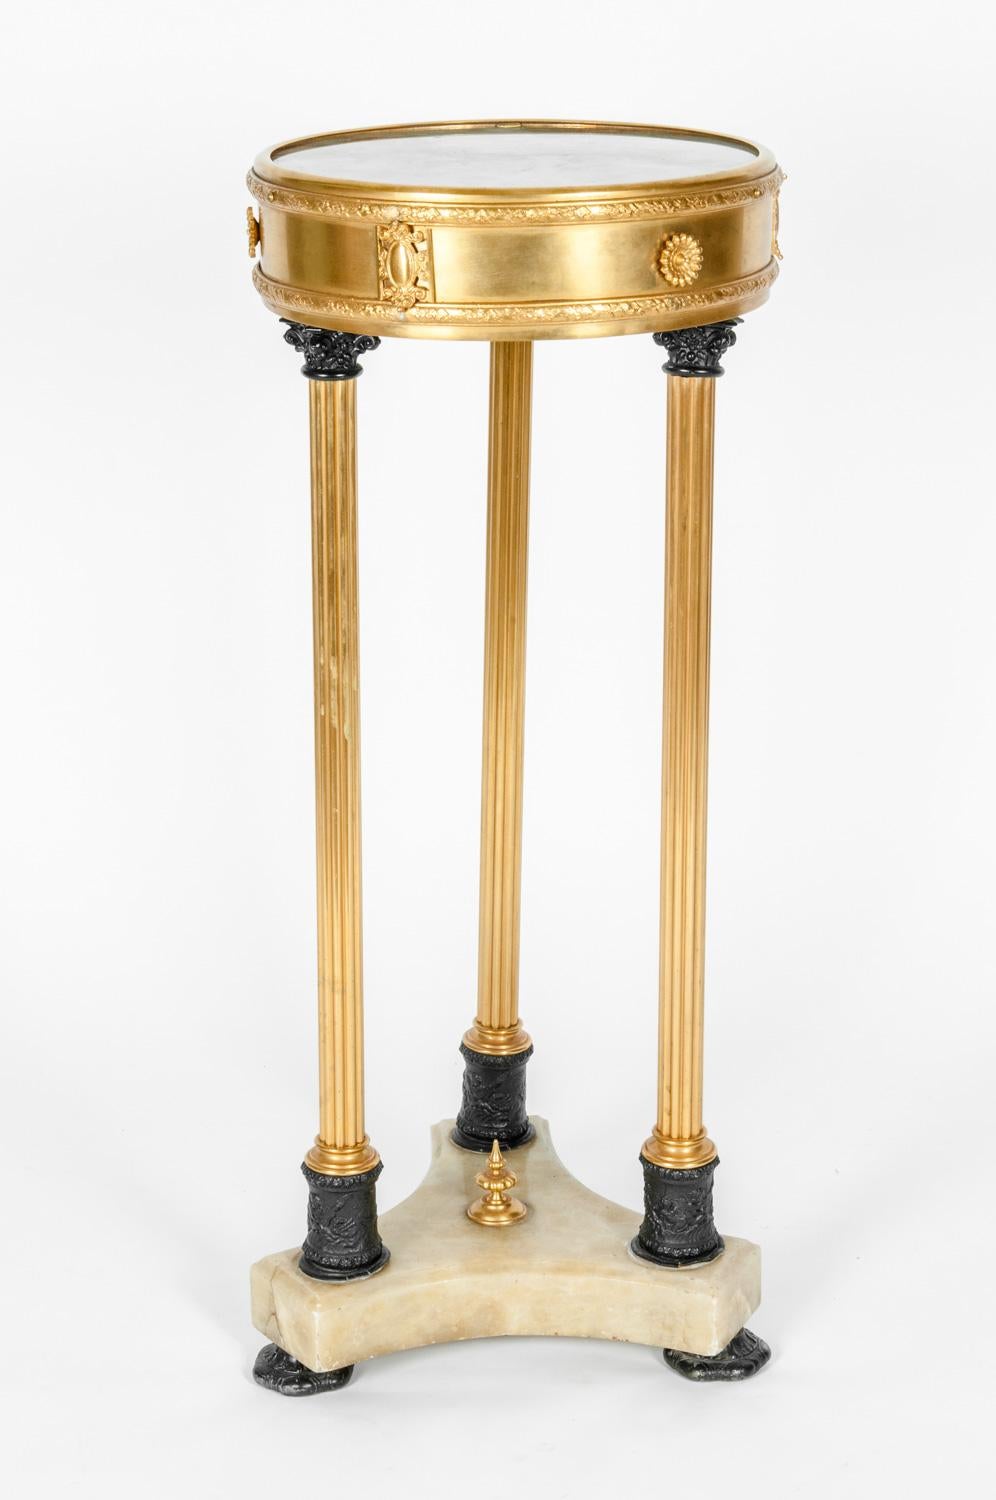 Mid-19th century Louis XVI style side table with onyx and gilt bronze. Two-tier end table with marble base. The table is in excellent condition. The table measure 12 inches top diameter x 29 inches high.